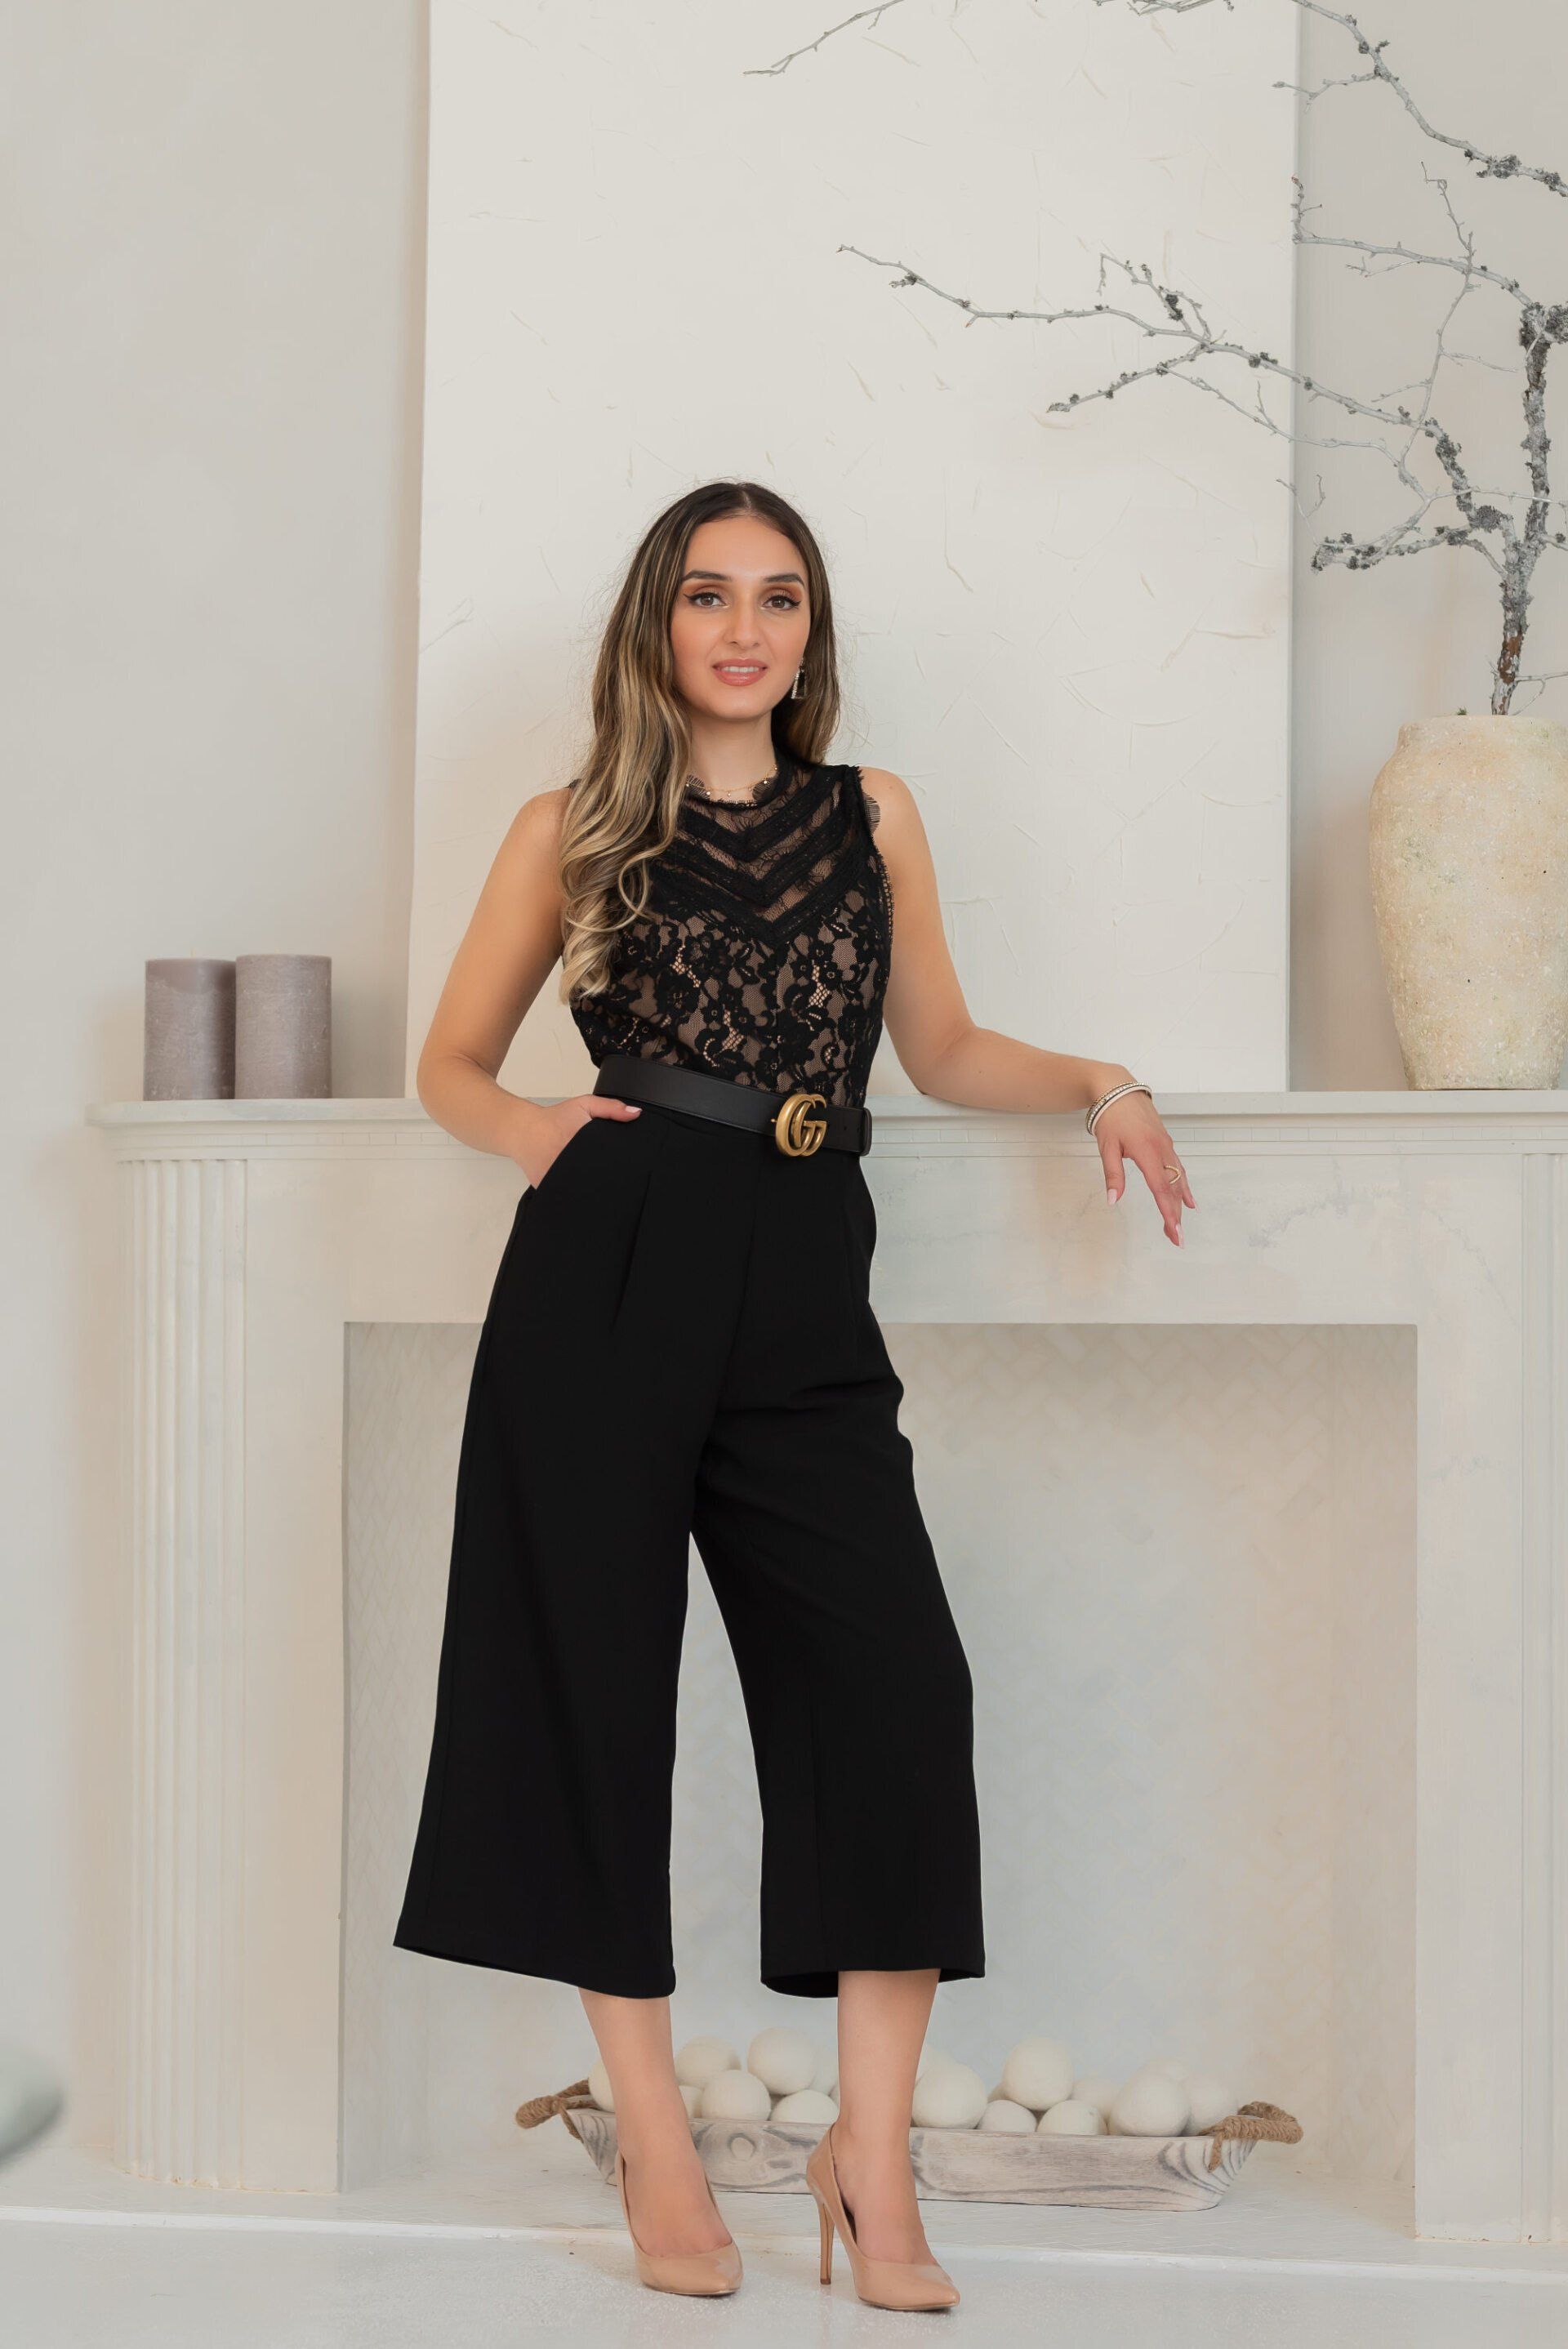 A confident young woman dressed in black pants and a black top stands against a white fireplace for a personal branding photo.